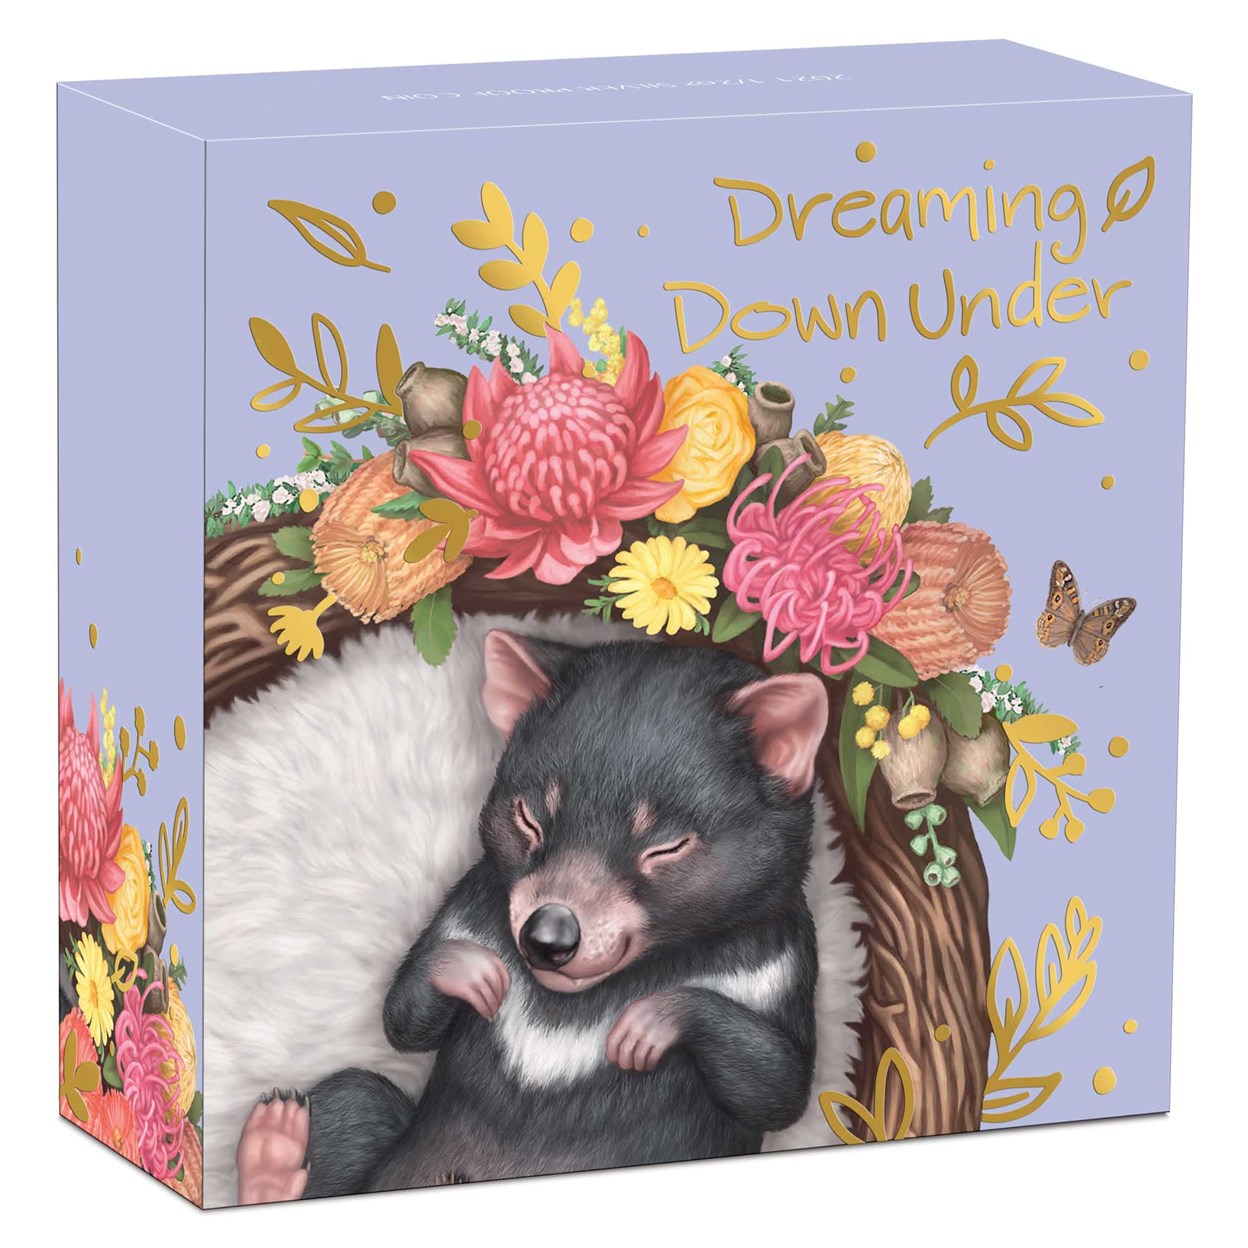 04 Dreaming Down Under TasmanianDevil 2021 1 2oz Silver Proof Coloured Coin InShipper HighRes